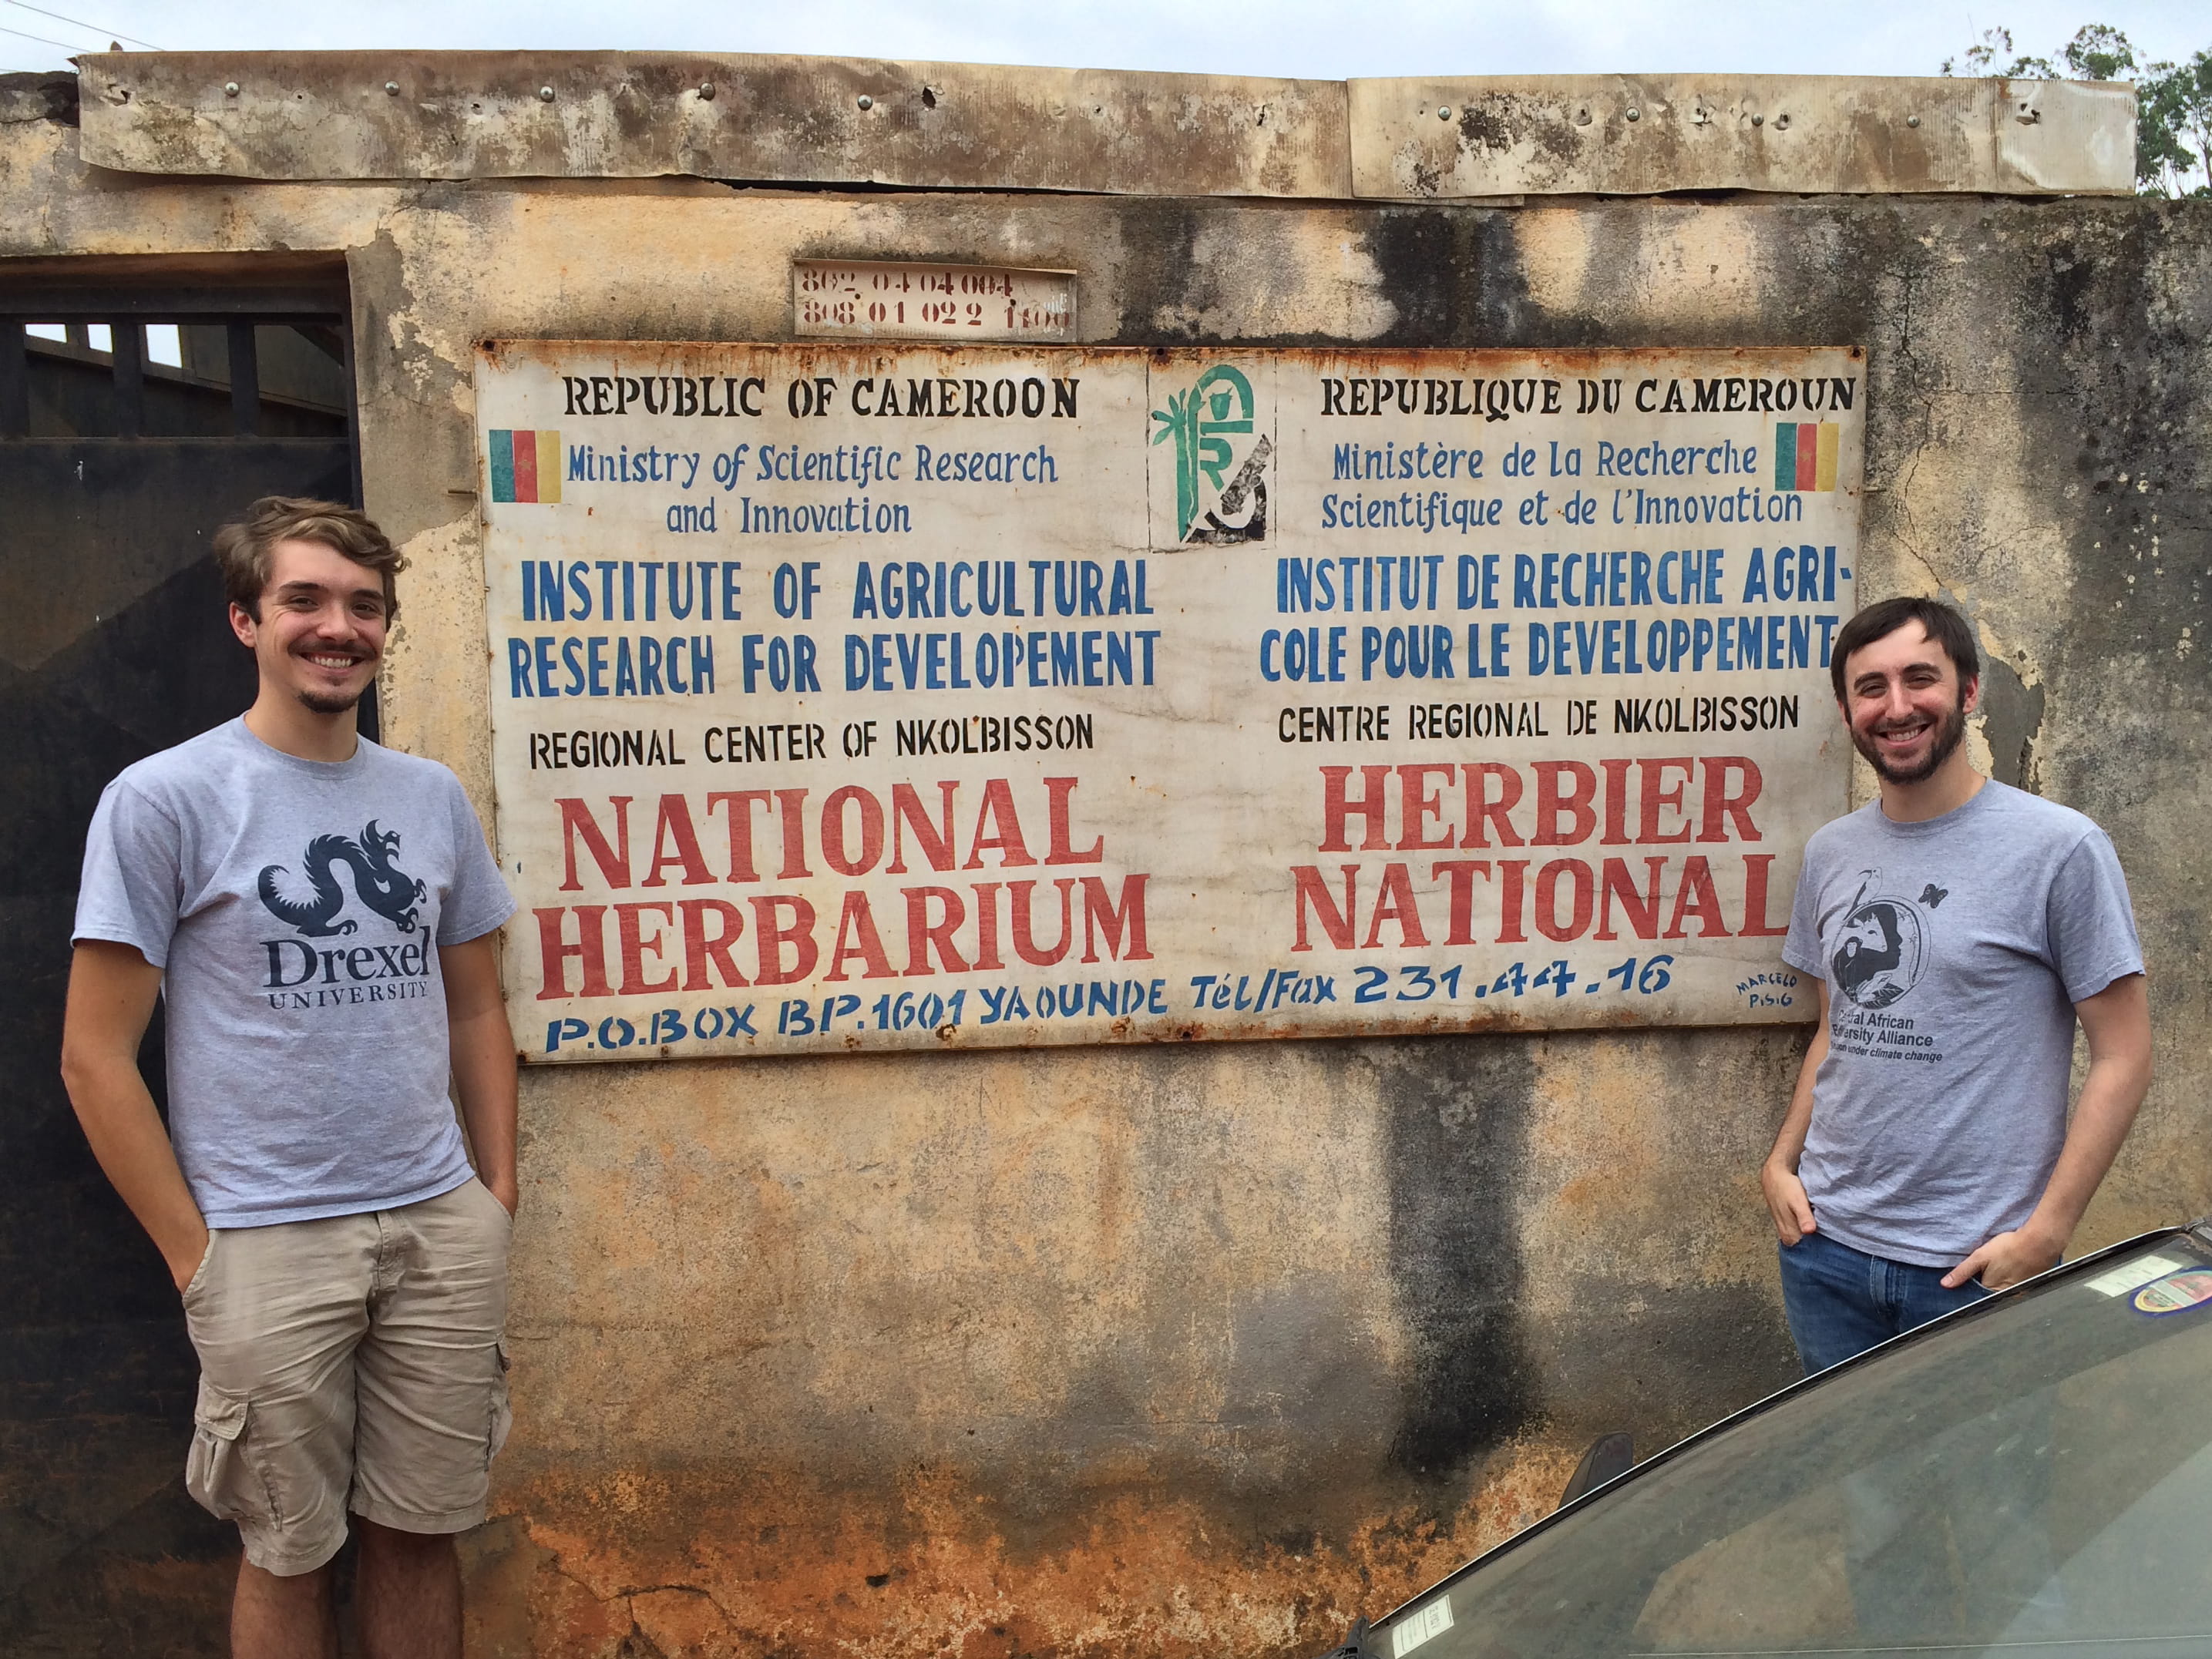 Paul Sesink Clee (left) and Matthew Mitchell (right) in Cameroon